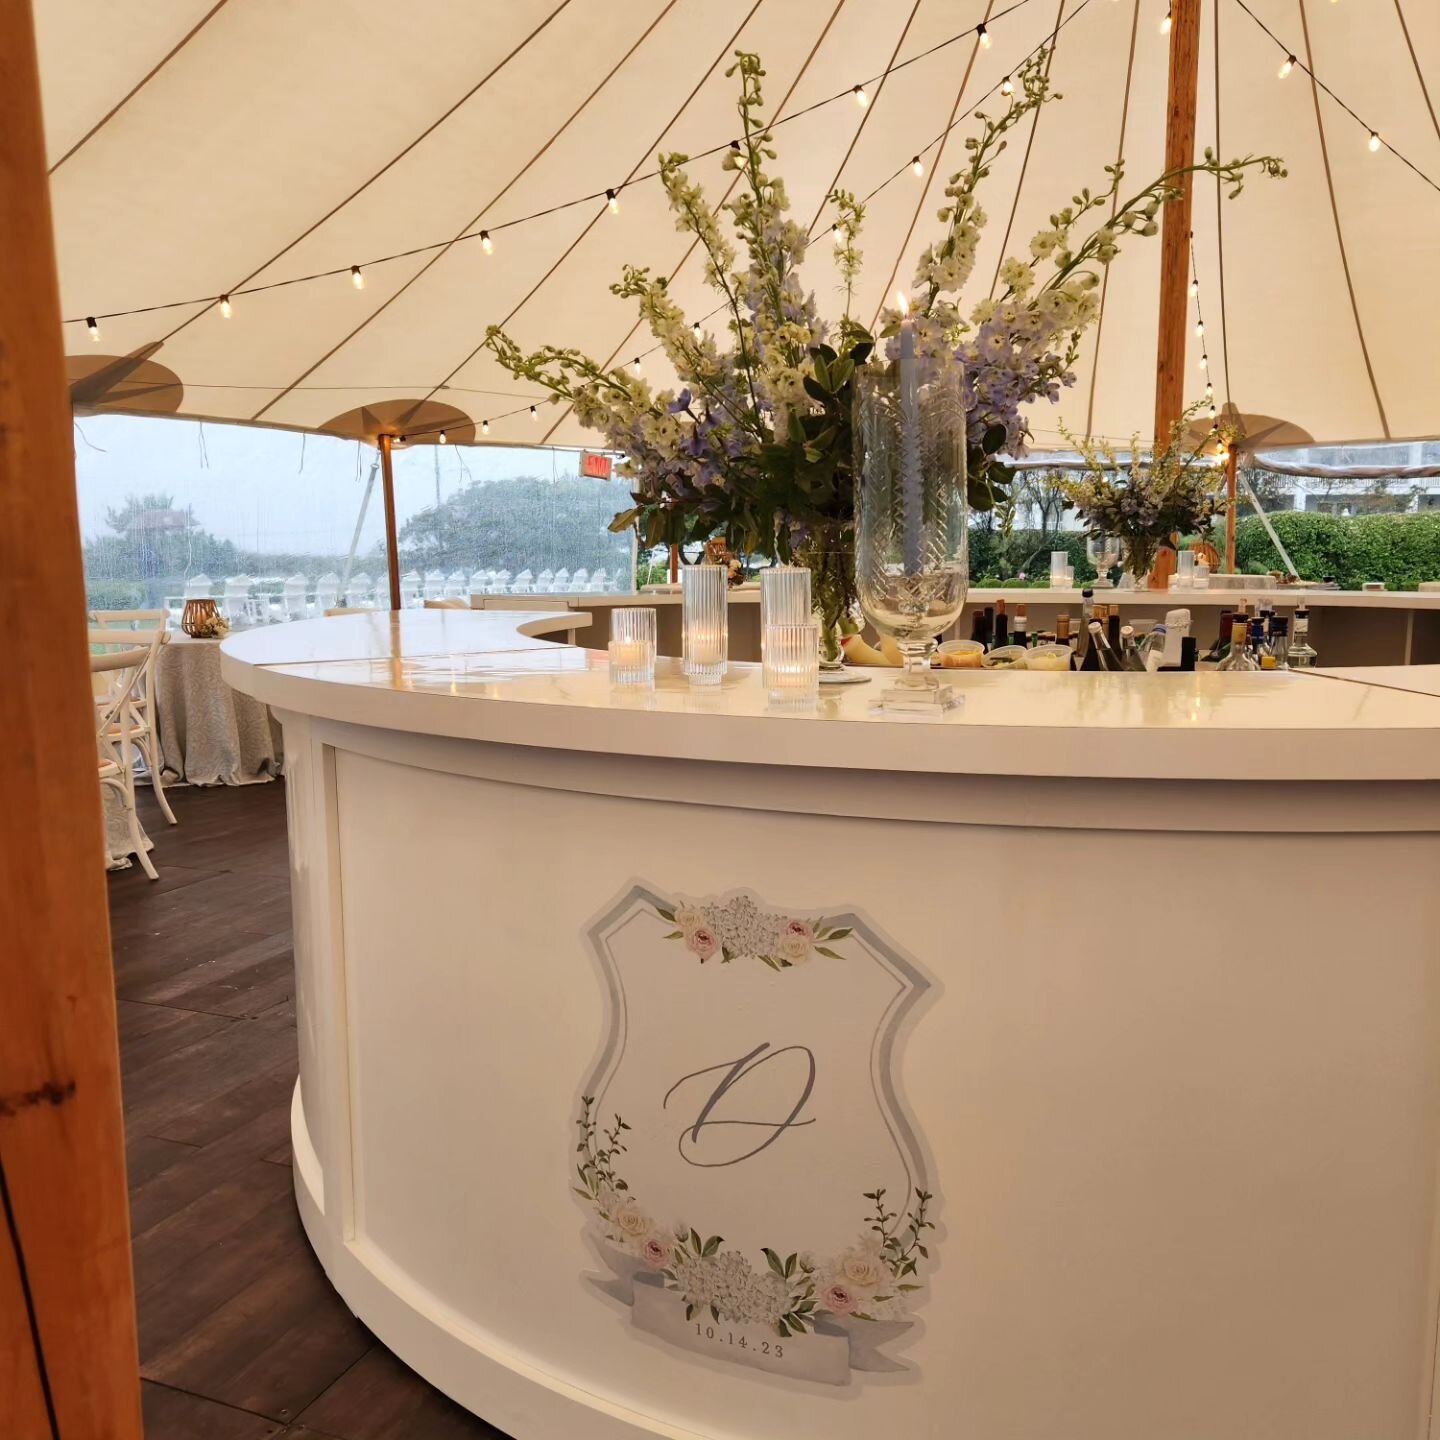 A little rain wasn't going to bother us yesterday. This couple had the most beautiful cocktail hour @congresshall #capemaywedding #cocktailhour #tentedwedding @belmomentoweddings @caperesortsweddings @whitegloverentals @nuagedesignsinc @rachelpearlma